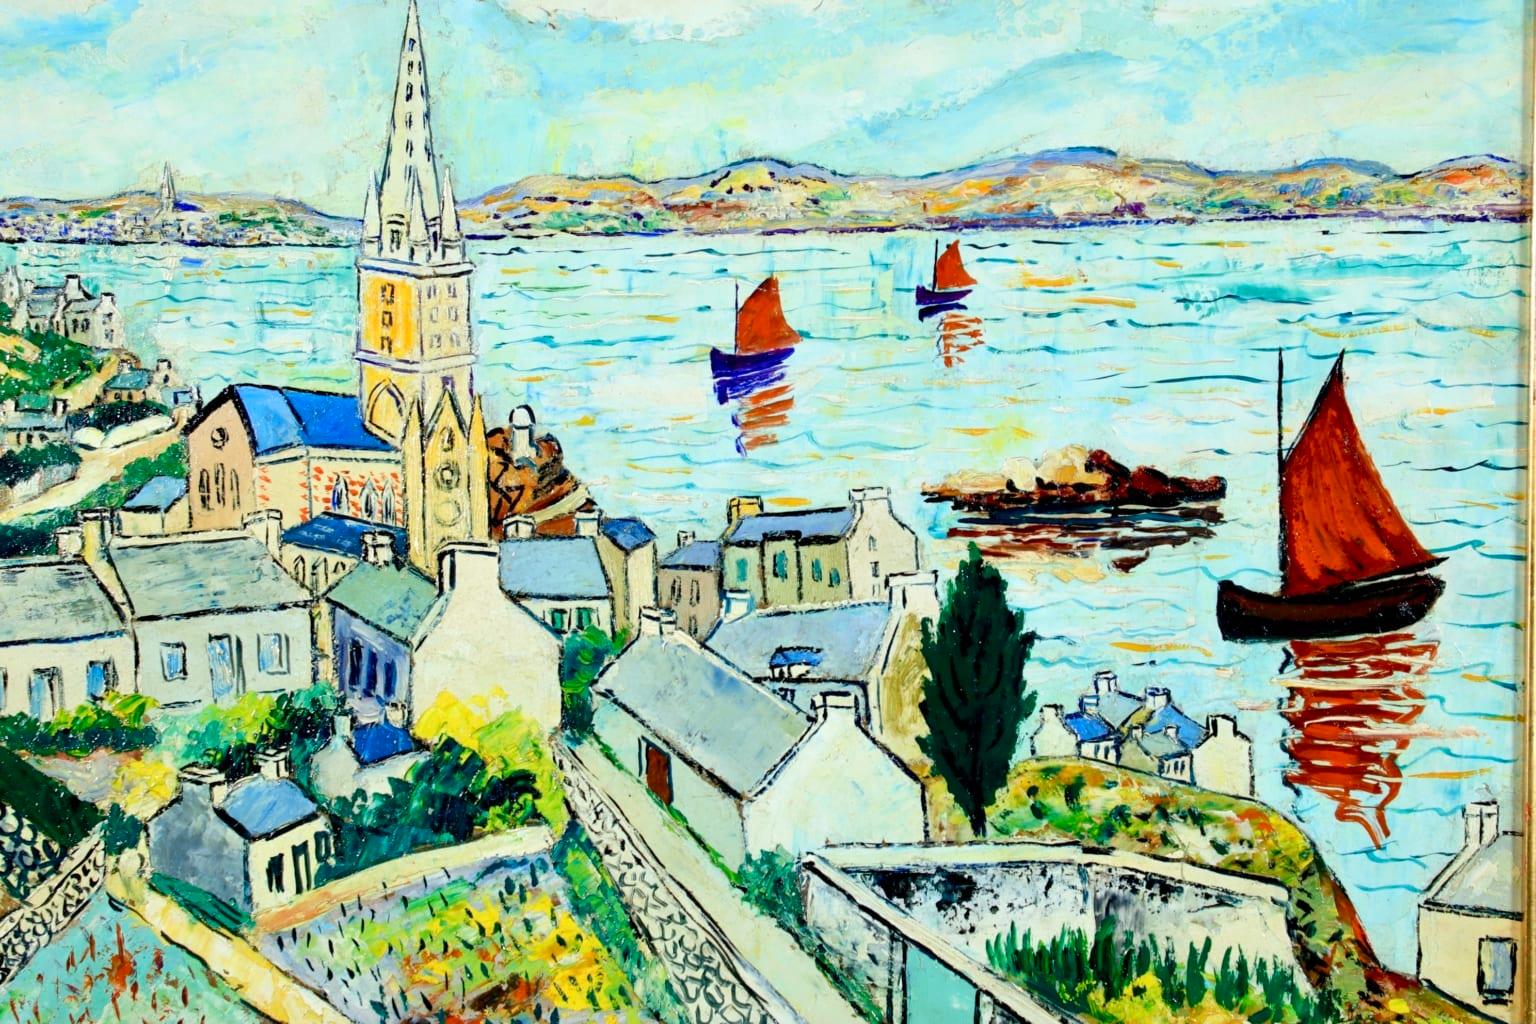 An enchanting oil on cardboard laid on panel by French post-impressionist painter Elisee Maclet depicting the French coastal town of Ile de Batz. The town church sits in the centre of the painting overlooking the bay where boats with red sails are